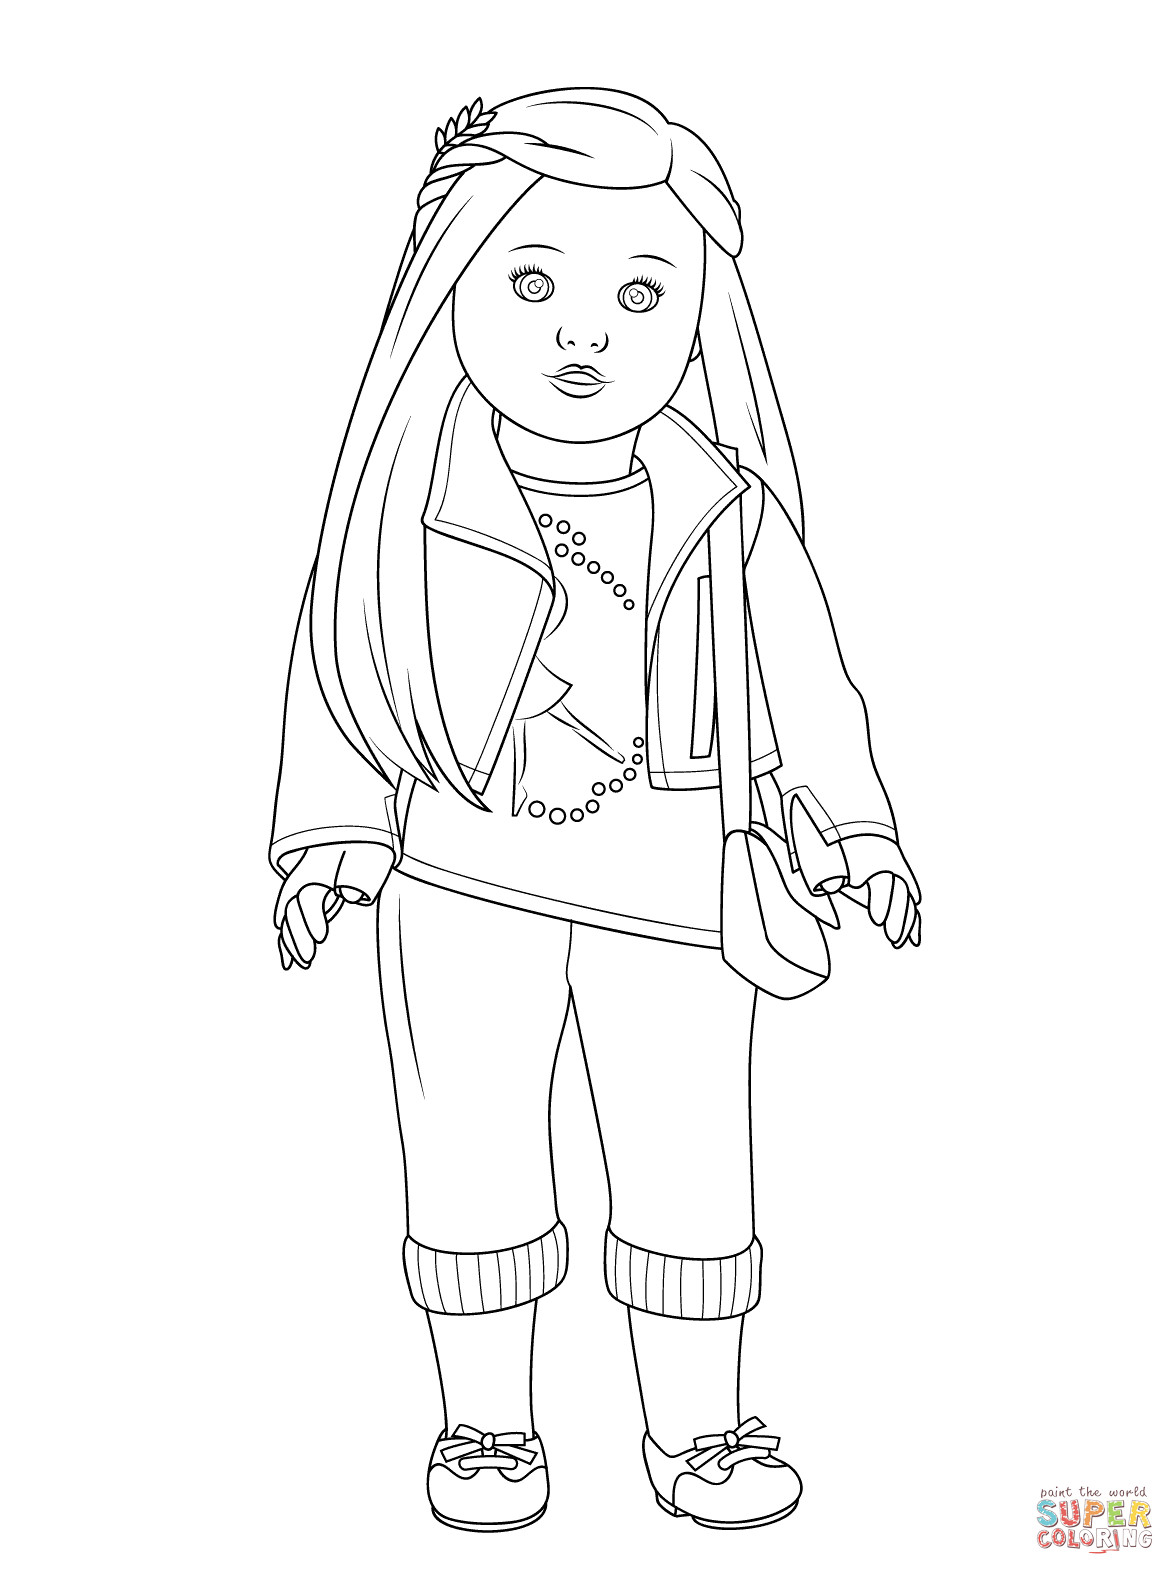 American Girl Coloring Sheet
 American Girl Isabelle Doll coloring page